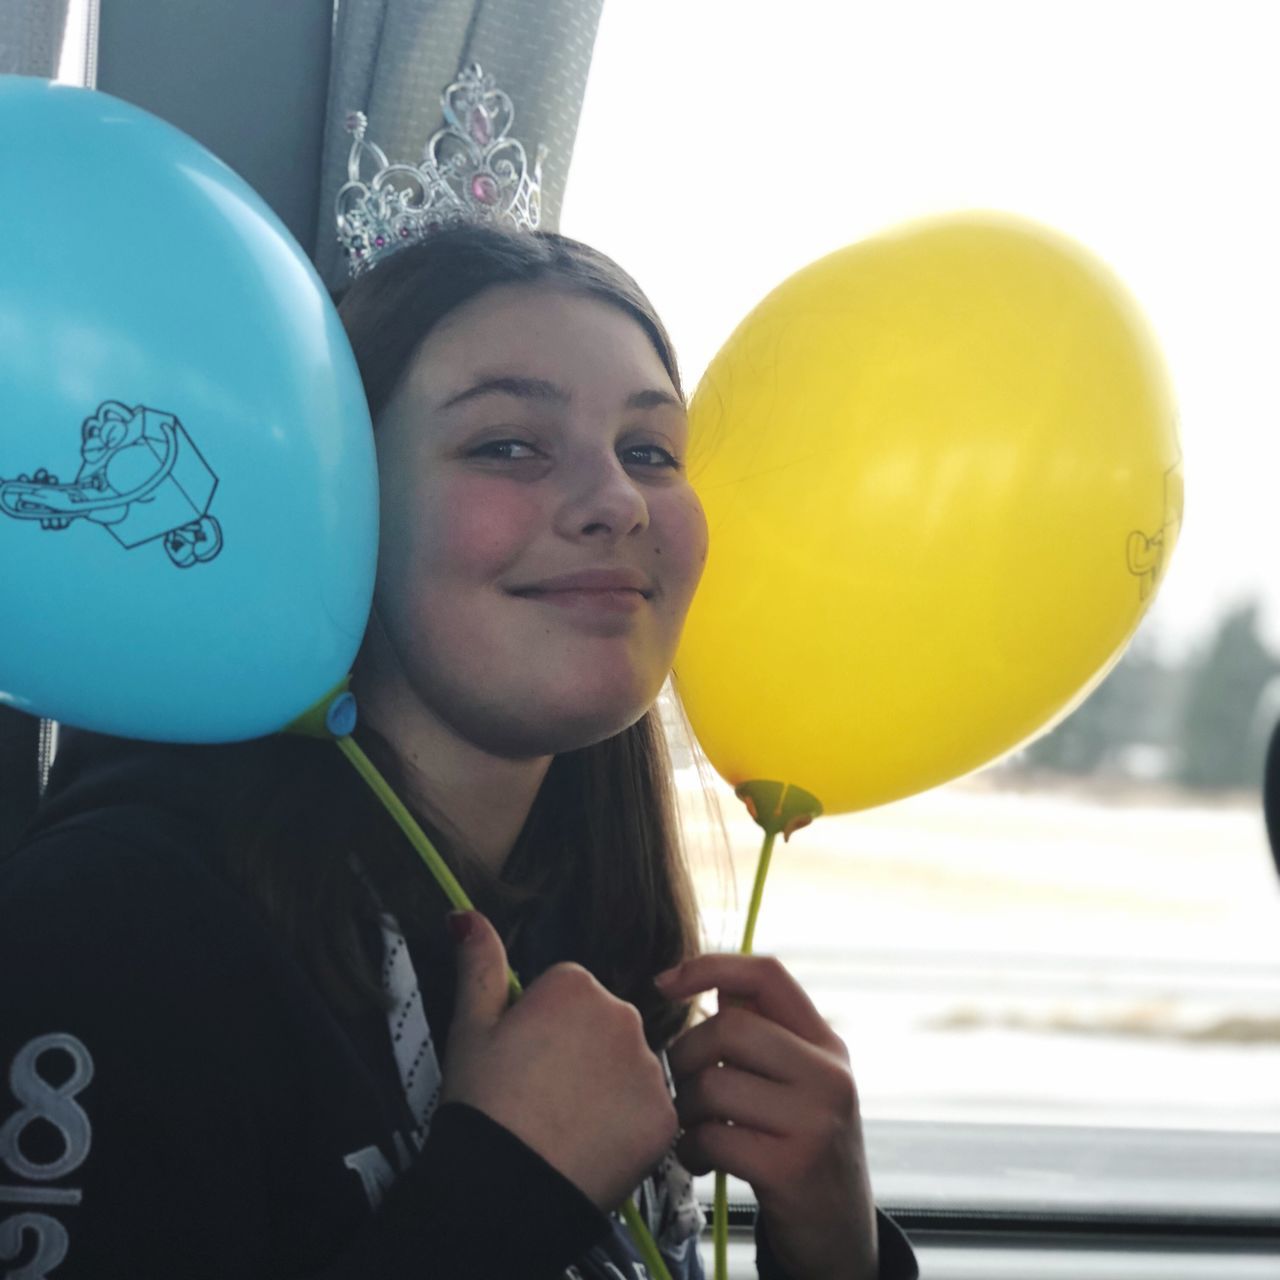 balloon, one person, real people, helium balloon, childhood, headshot, celebration, holding, portrait, looking at camera, birthday, front view, close-up, day, happiness, outdoors, bubble wand, young adult, people